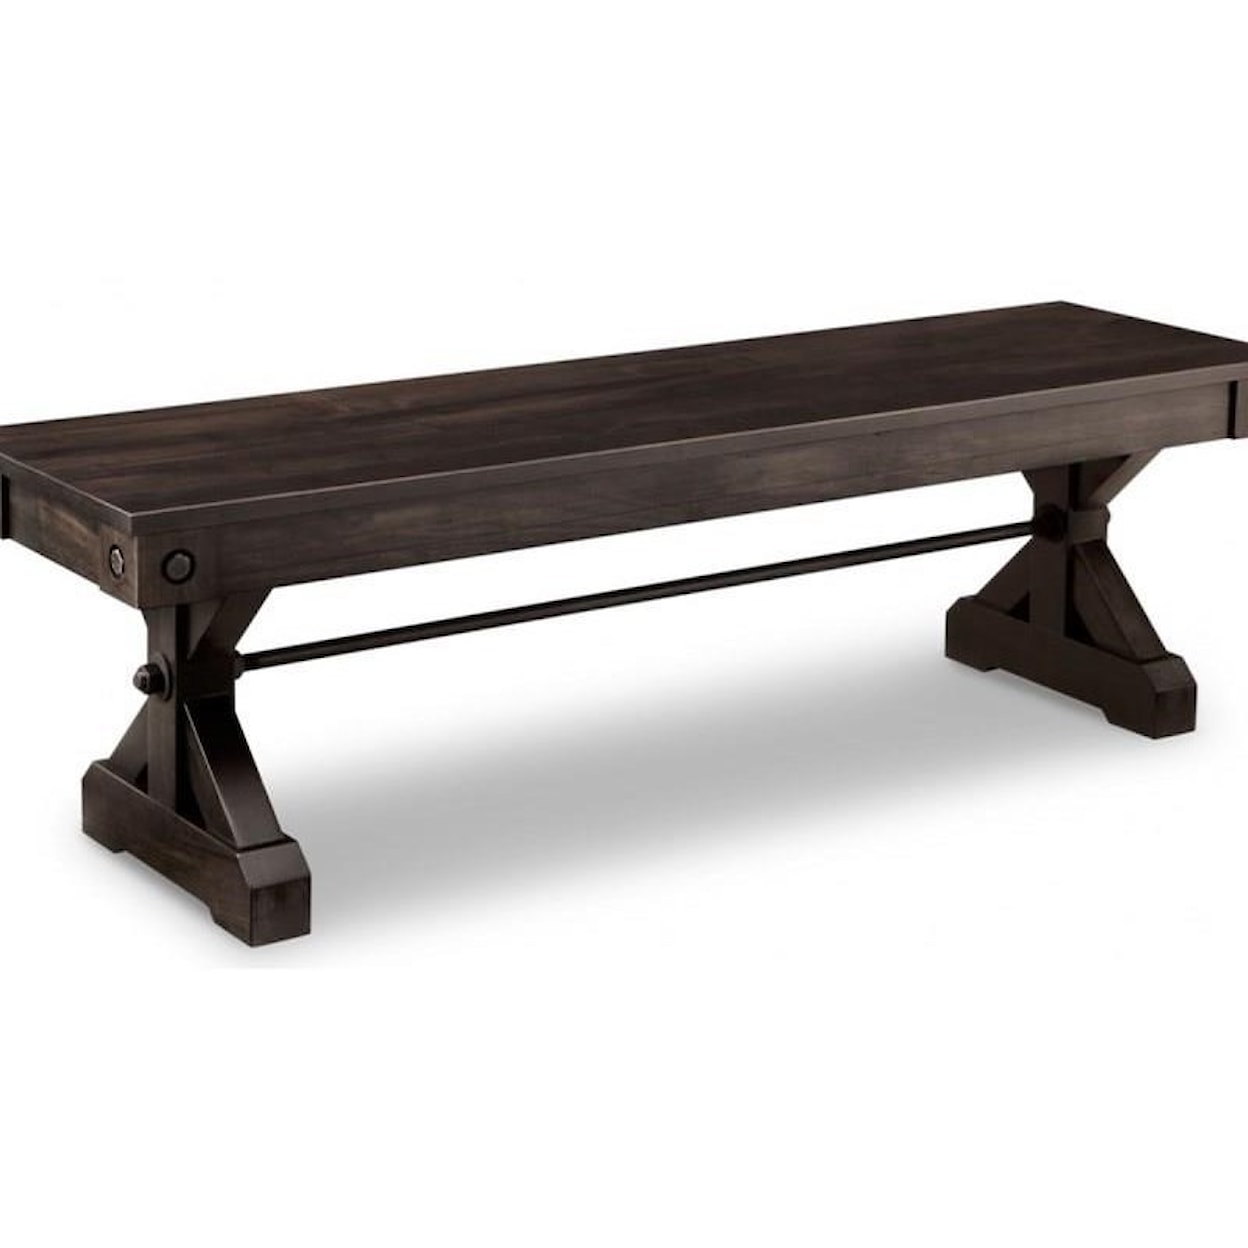 Handstone Rafters 60" Bench with Wood Seat